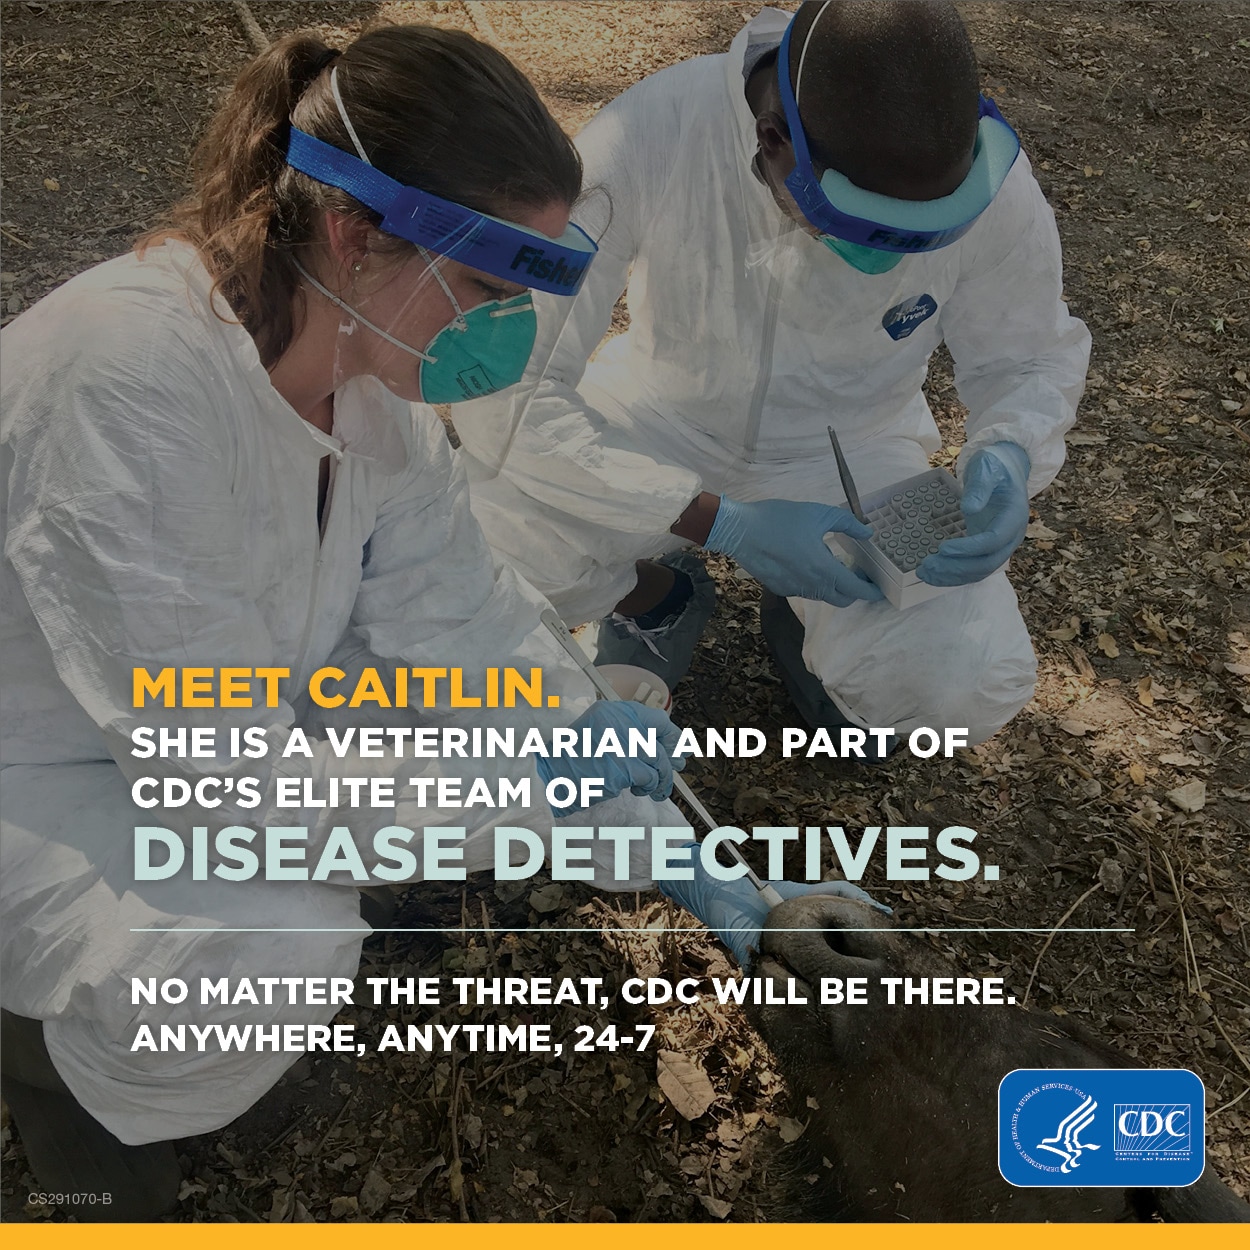 Meet Caitlin.  She is a veterinarian and part of CDC's elite team of disease detectives.